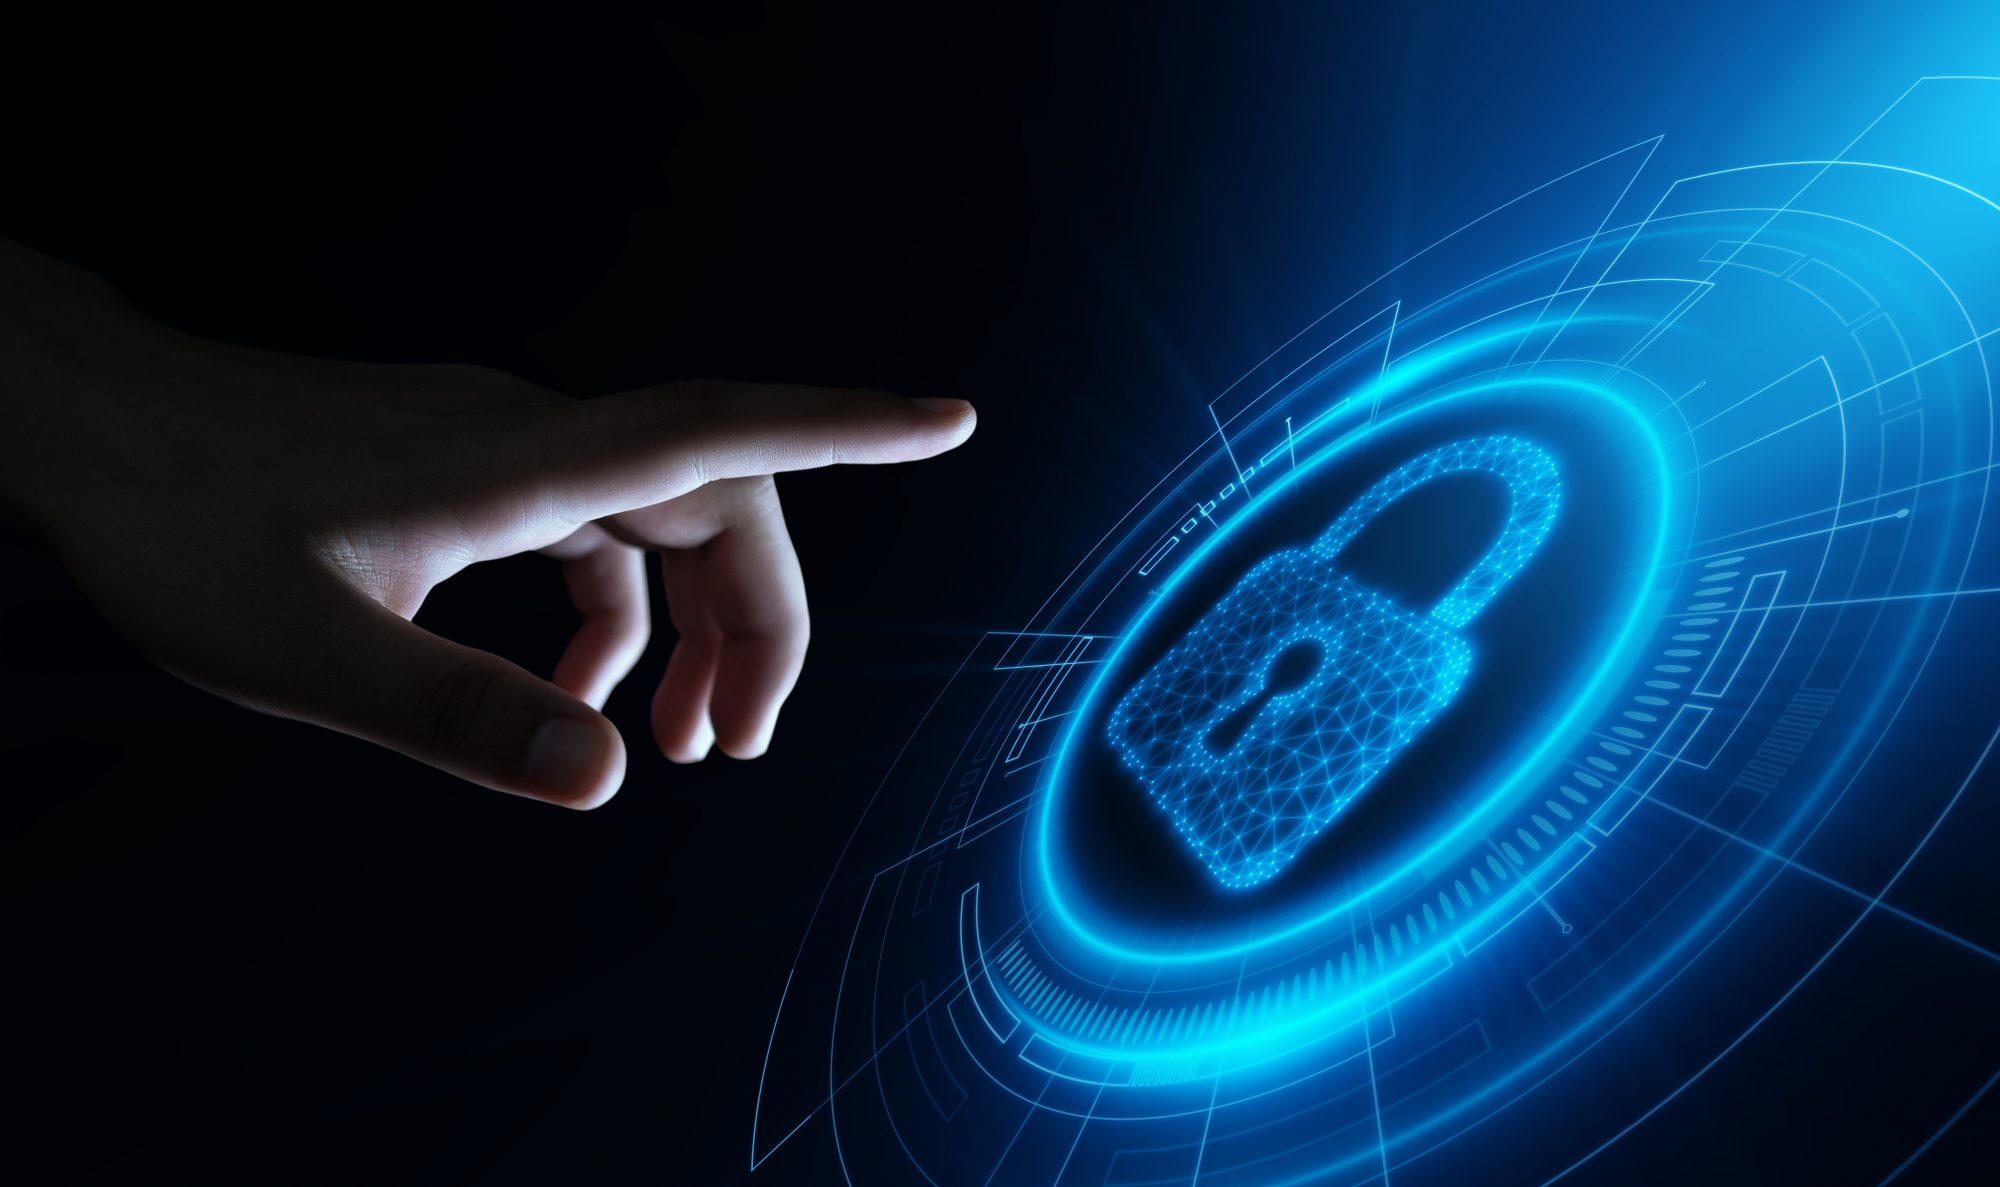 Dark background with person's finger pointed towards blue padlock